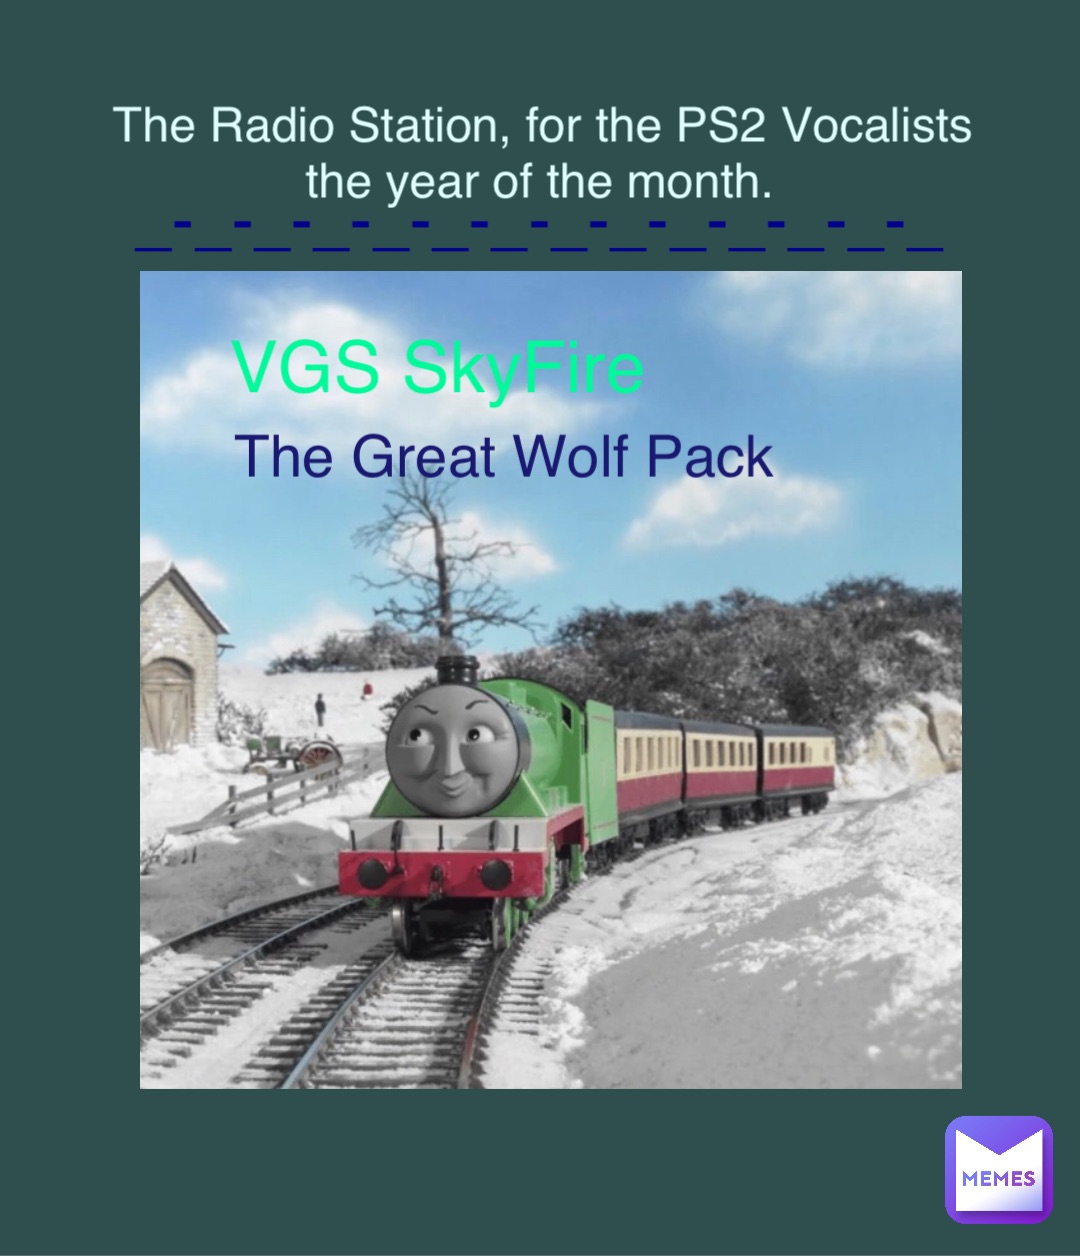 VGS SkyFire The Great Wolf Pack The Radio Station, for the PS2 Vocalists the year of the month. _-_-_-_-_-_-_-_-_-_-_-_-_-_